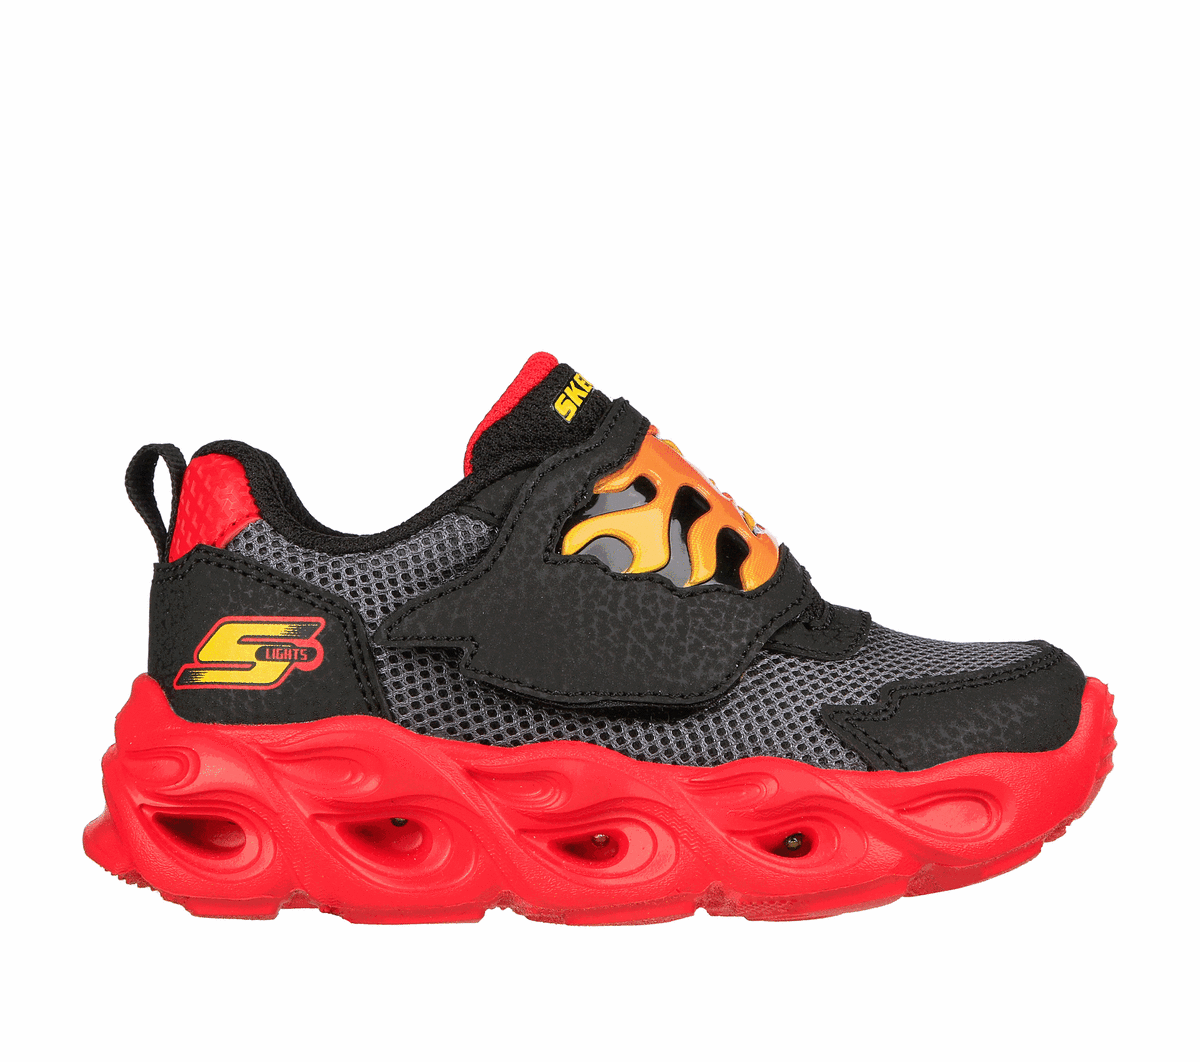 S Lights: Thermo Flash - Flame Flow | SKECHERS UK